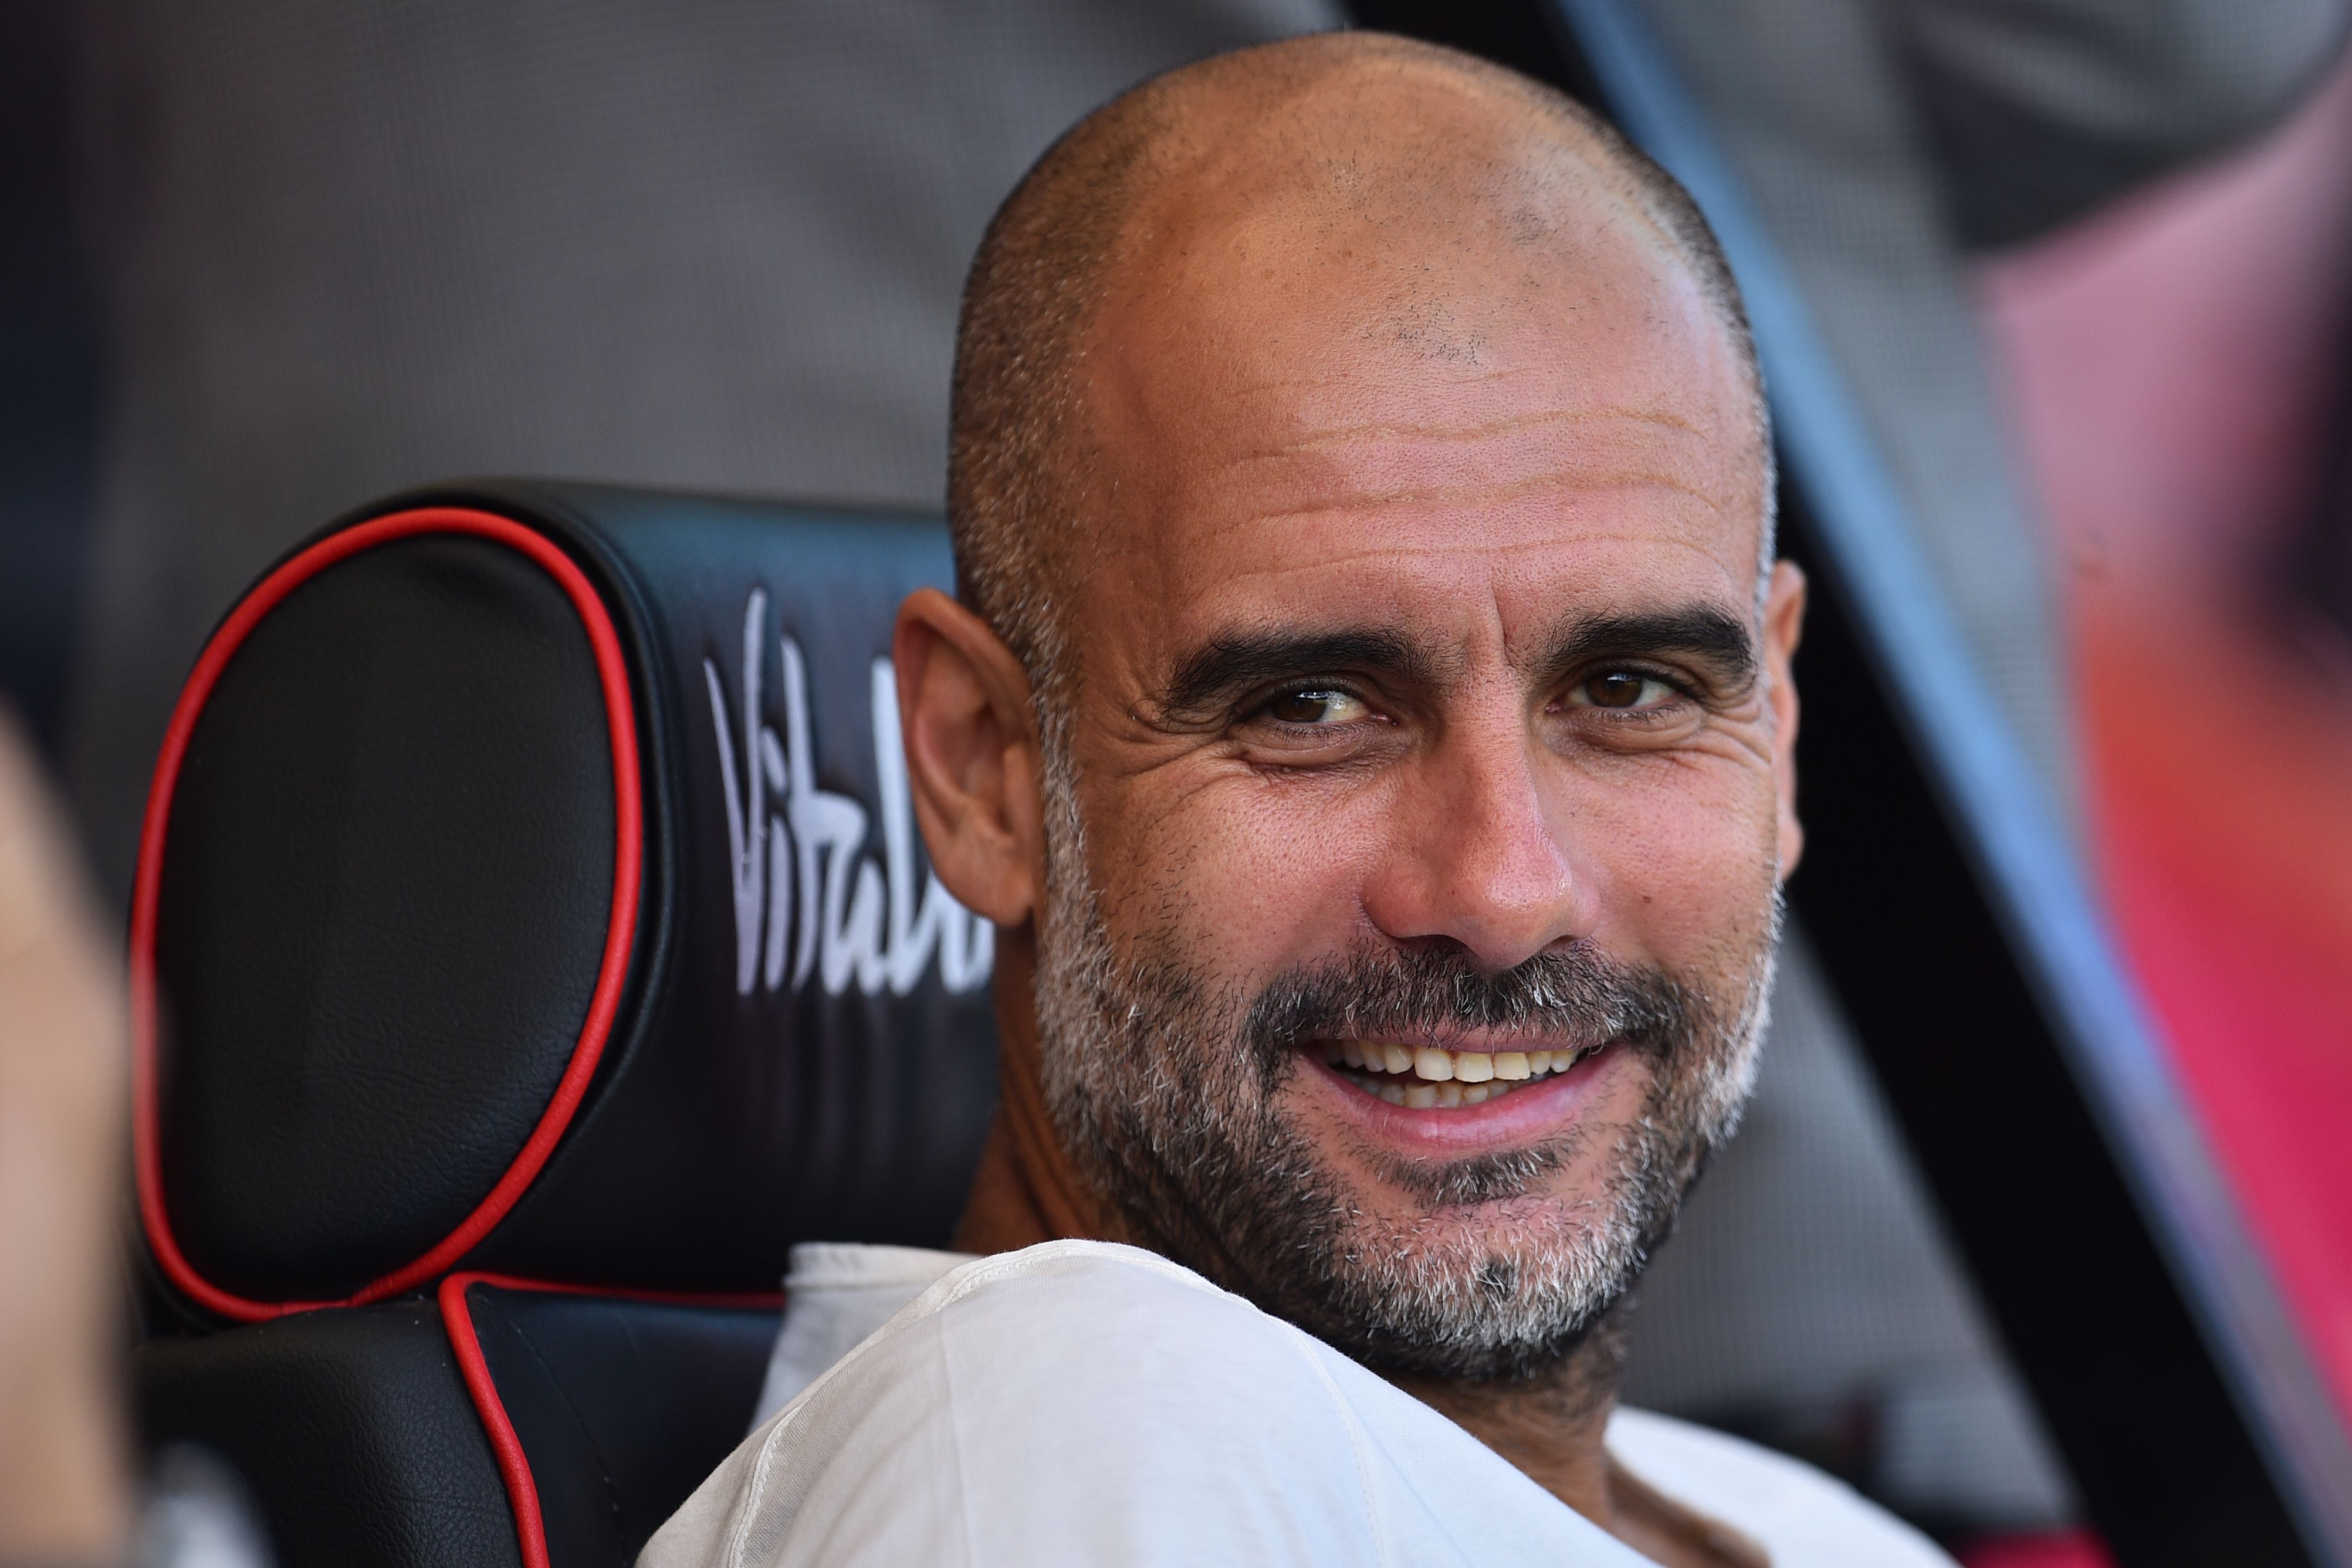 Pep Guardiola is aiming to win the Champions League with Manchester City.